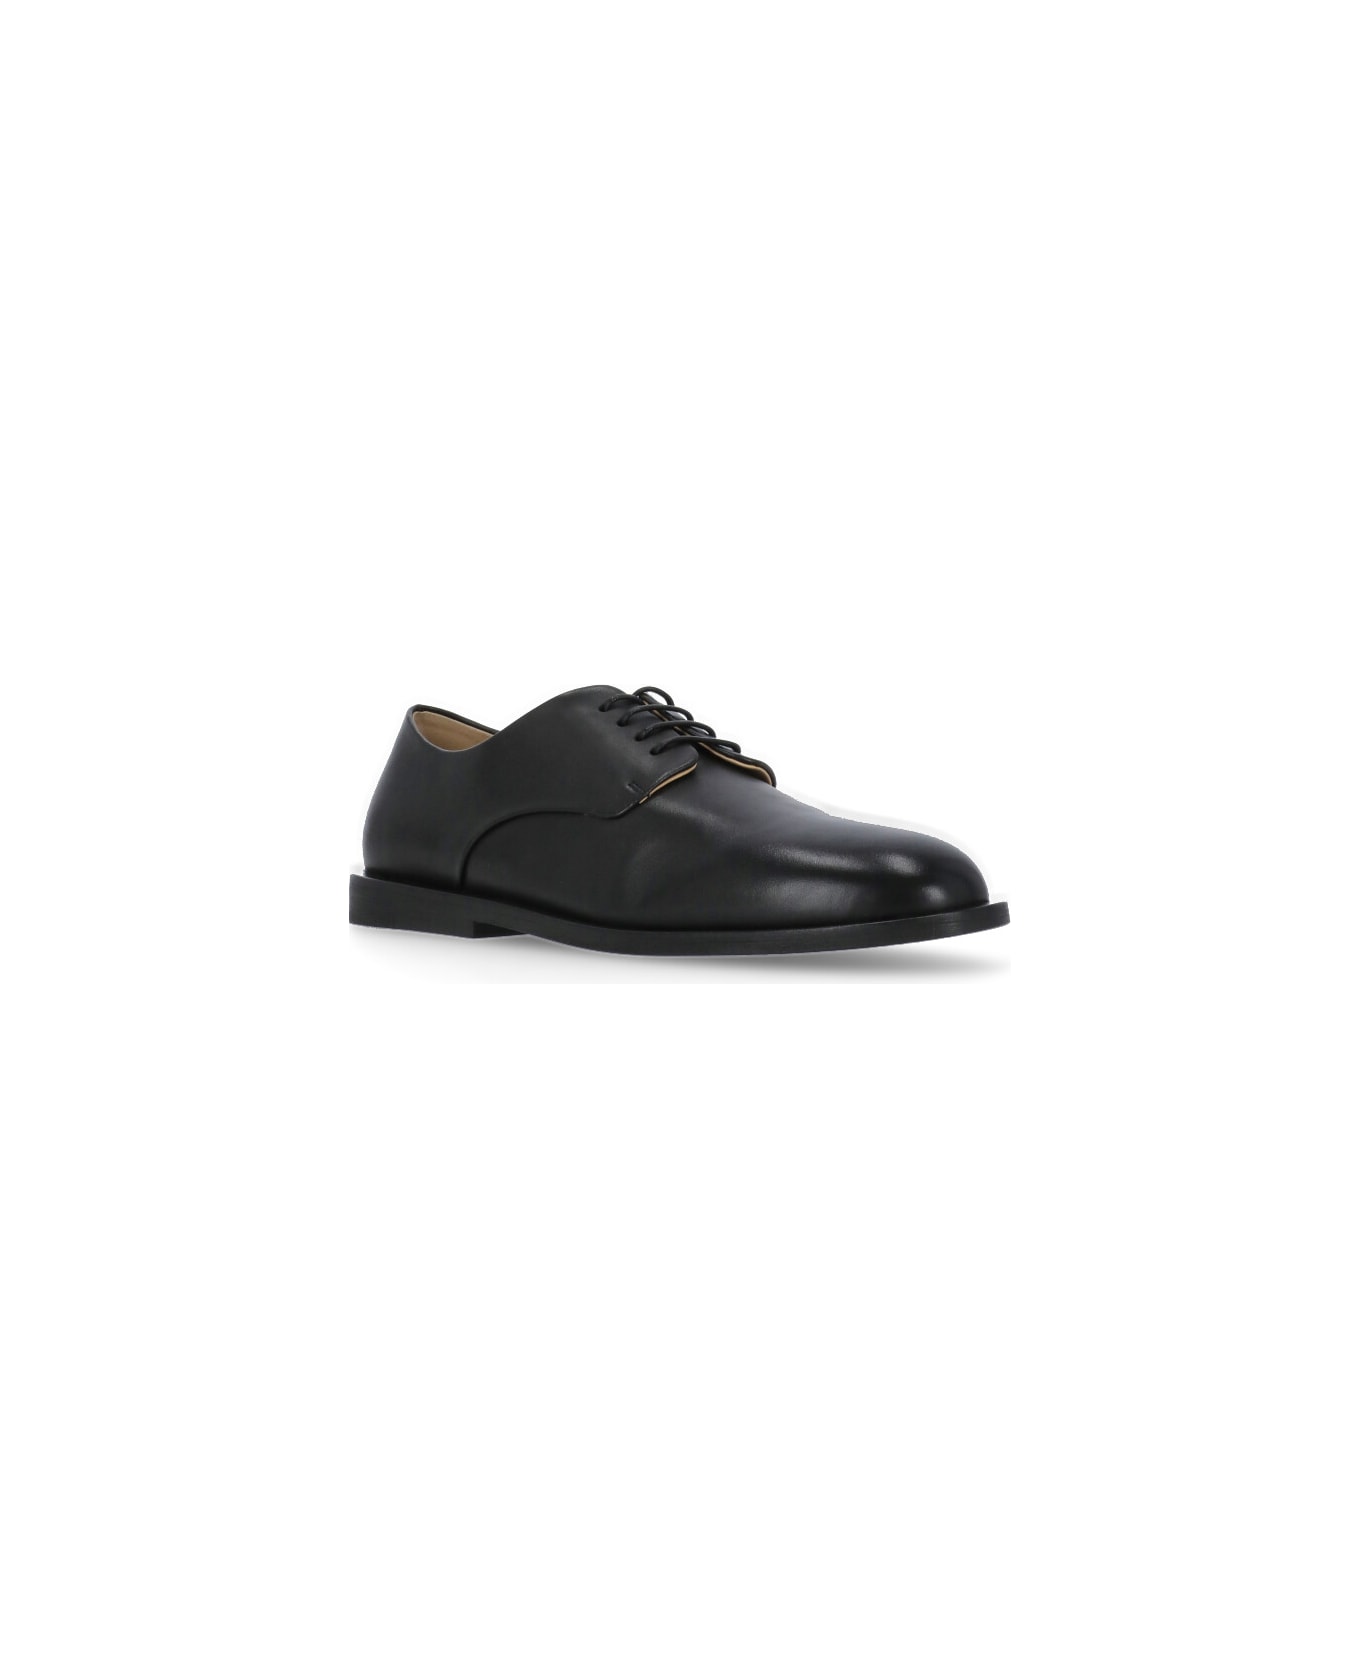 Marsell Mando Derdy Lace-up Shoes - Black